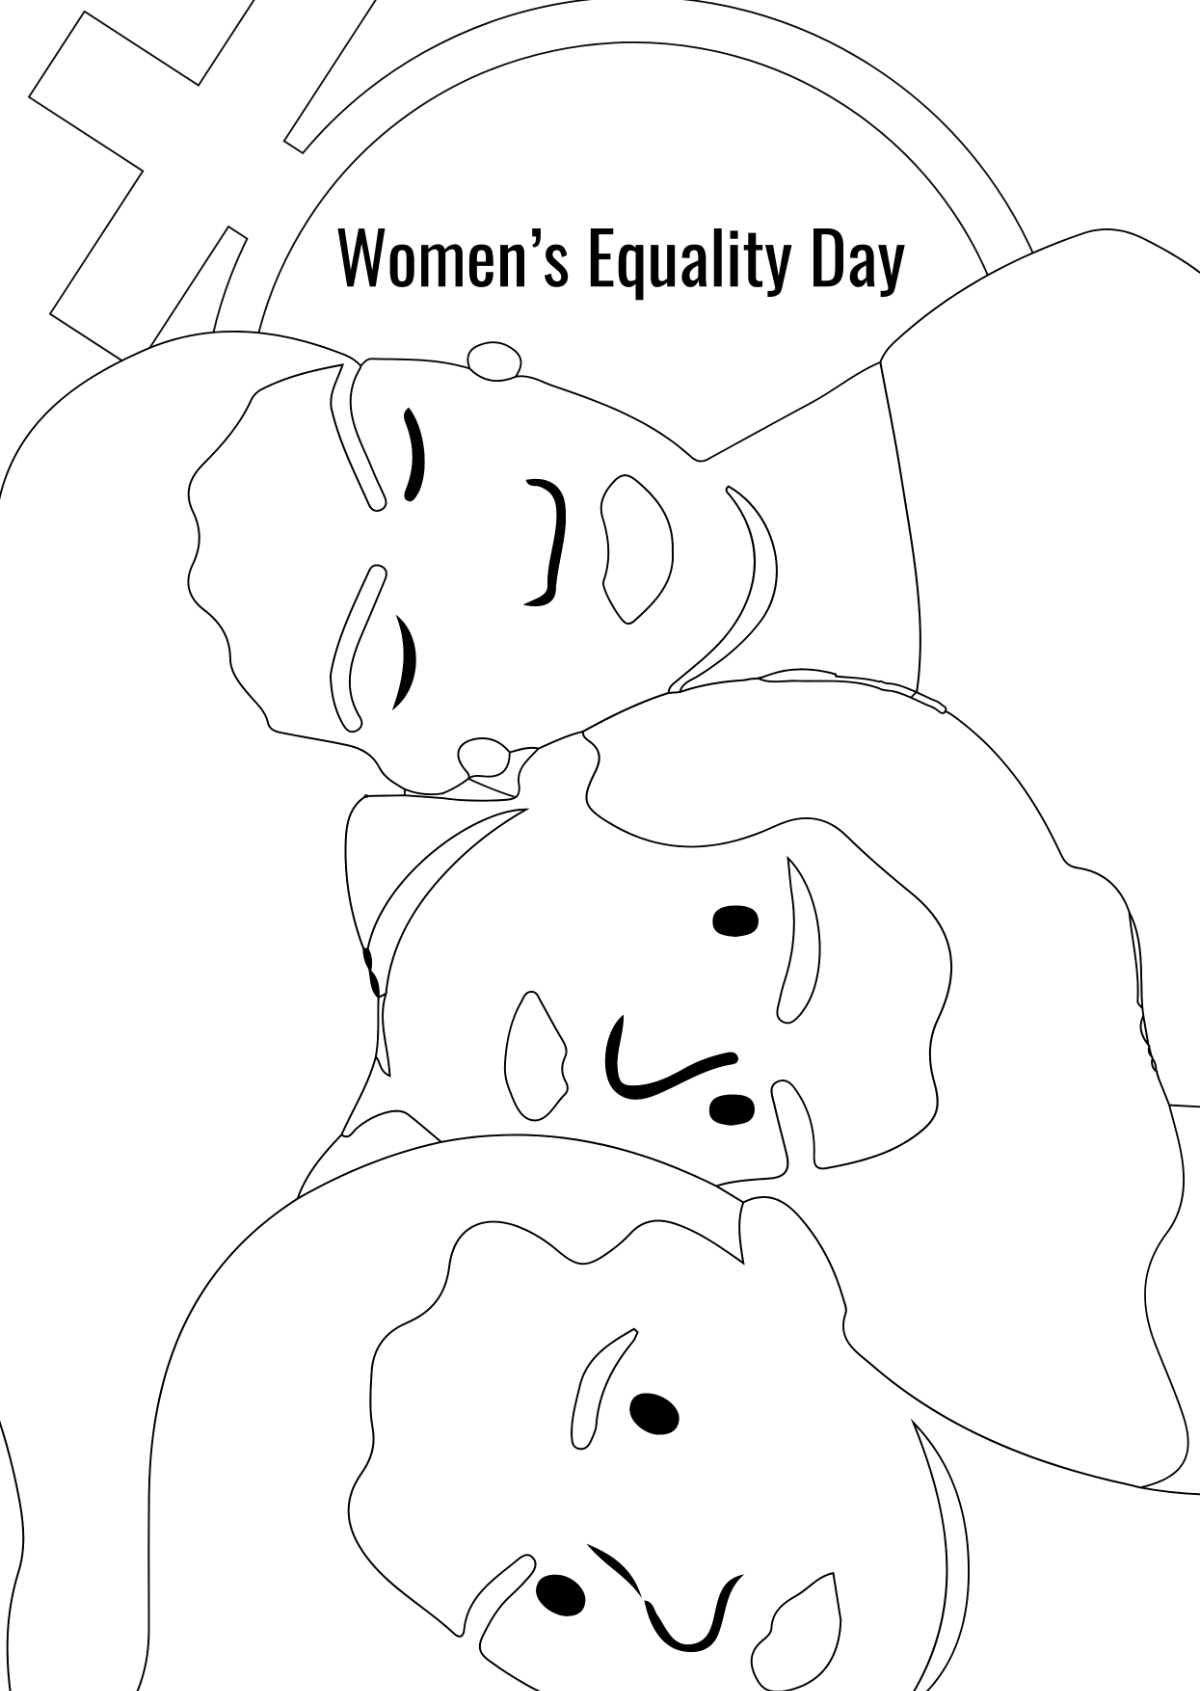 Women's Equality Day Poster Drawing